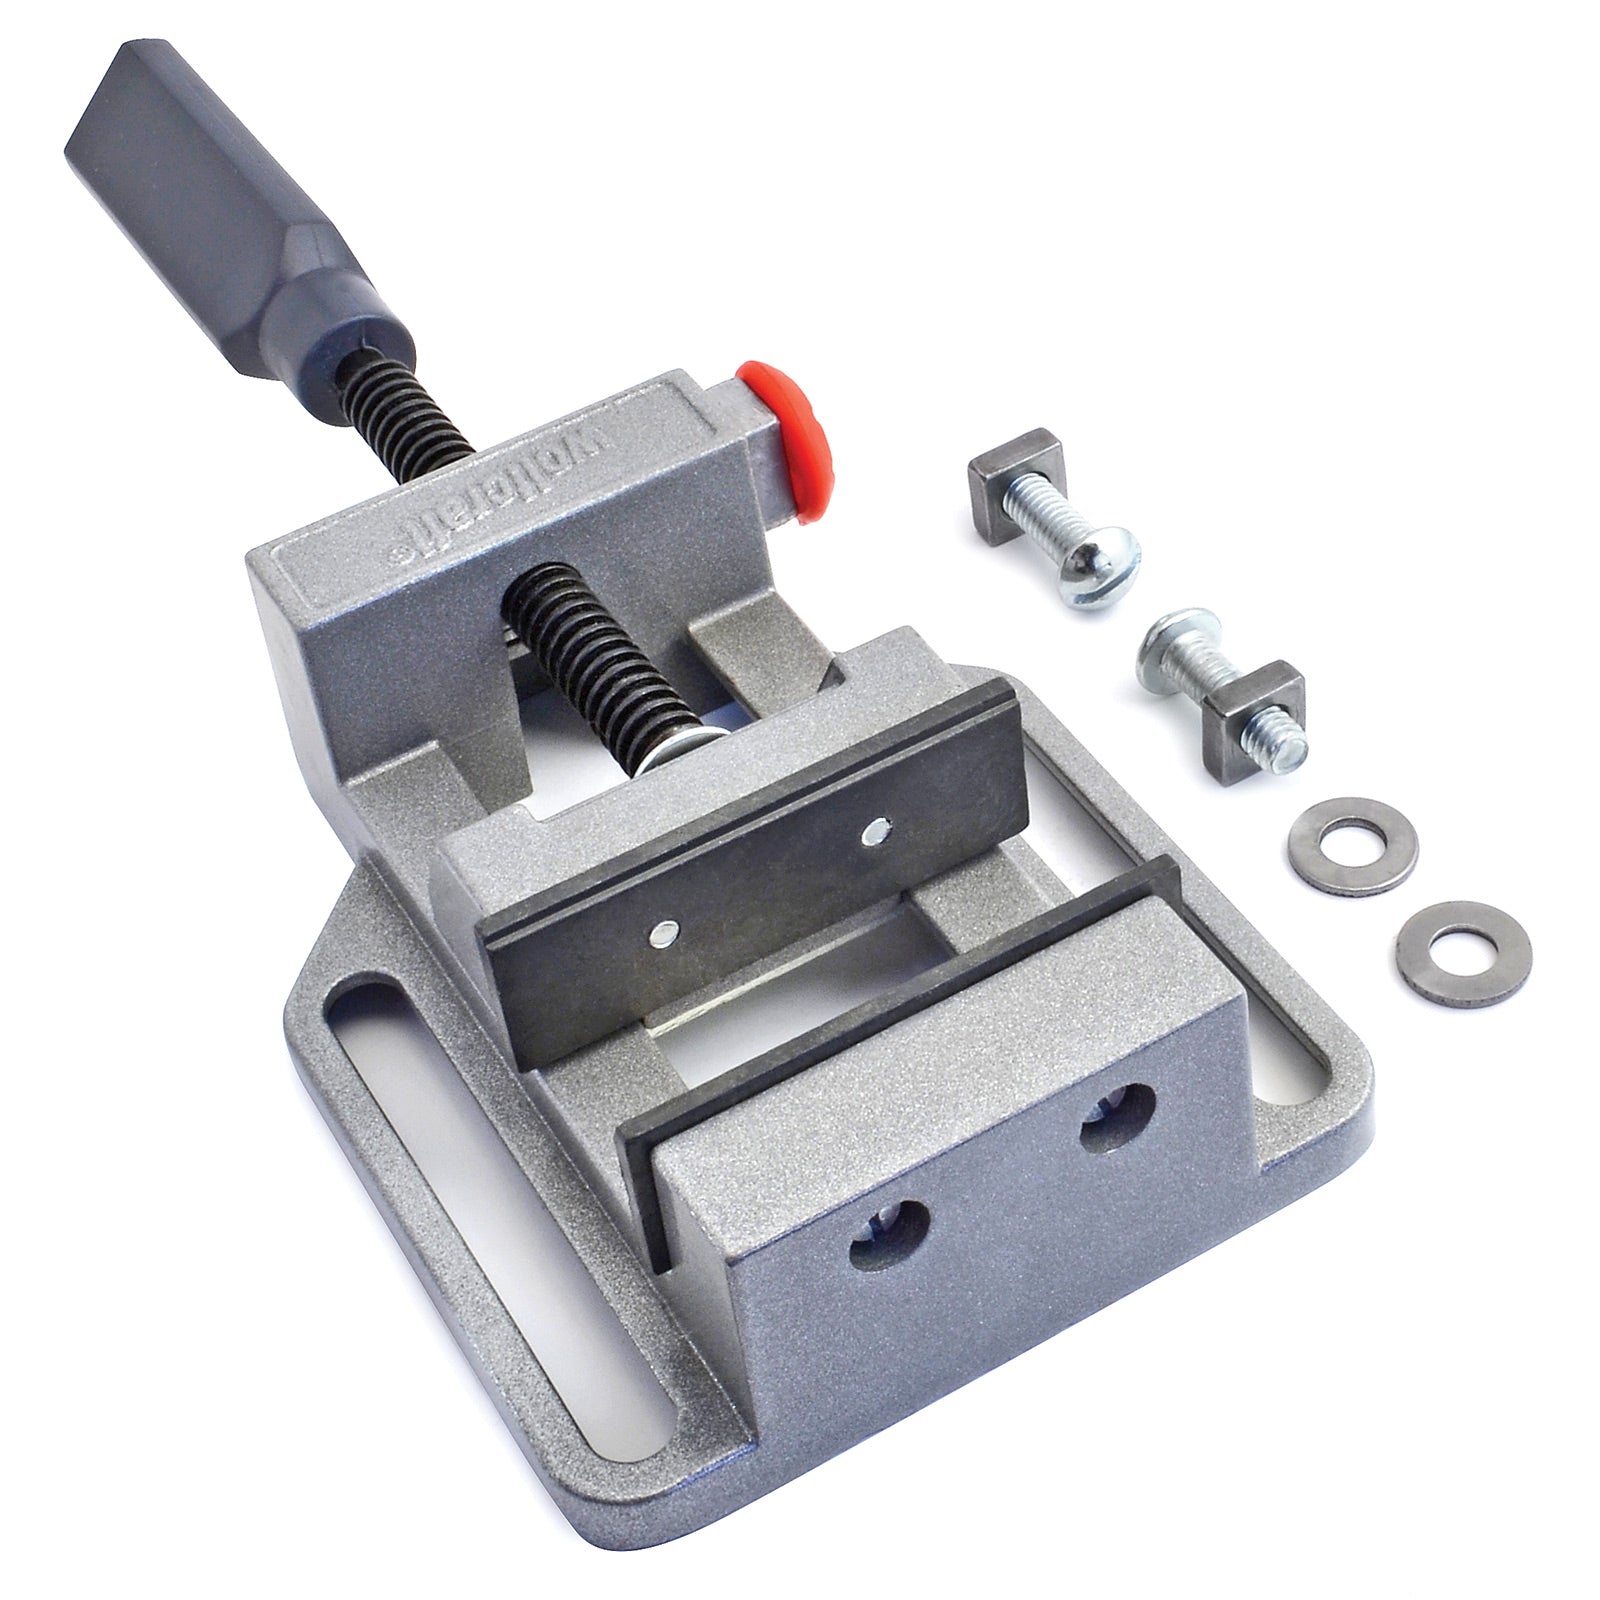 Quick - Jaw Vise, 2 - 3/4 Inch Capacity - Micro - Mark Tool Clamps & Vises